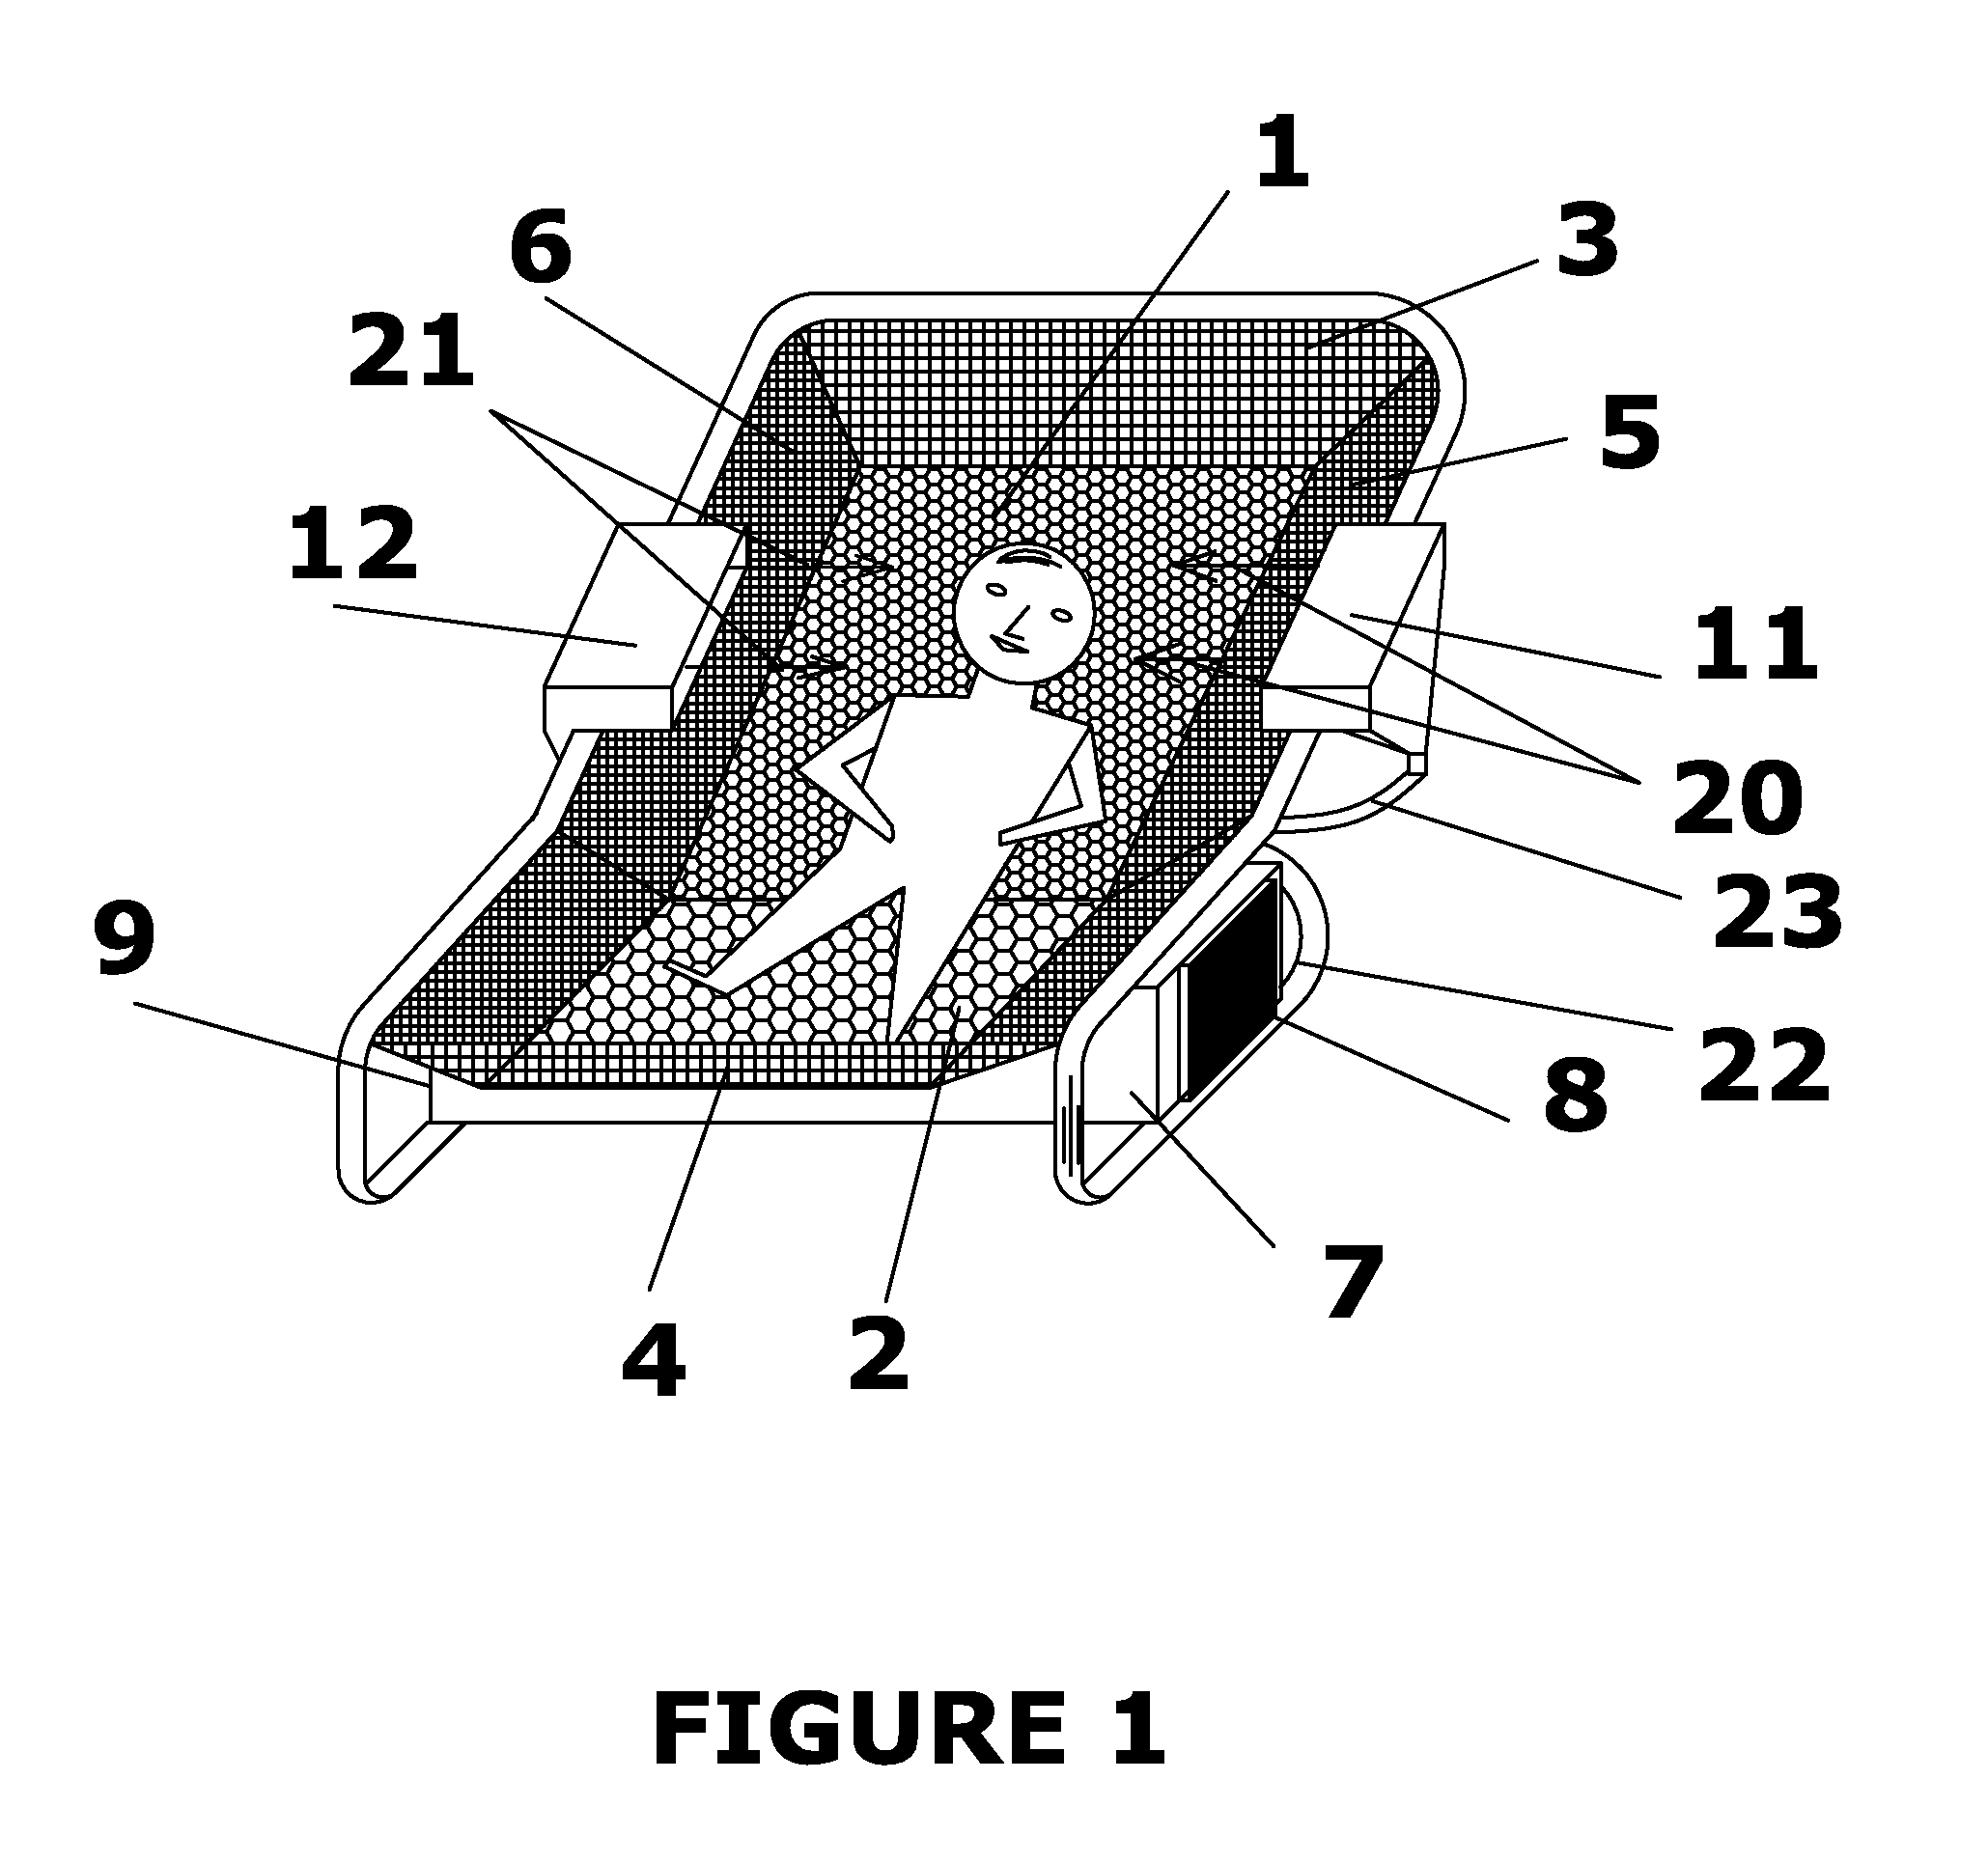 Apparatus for caring for infants